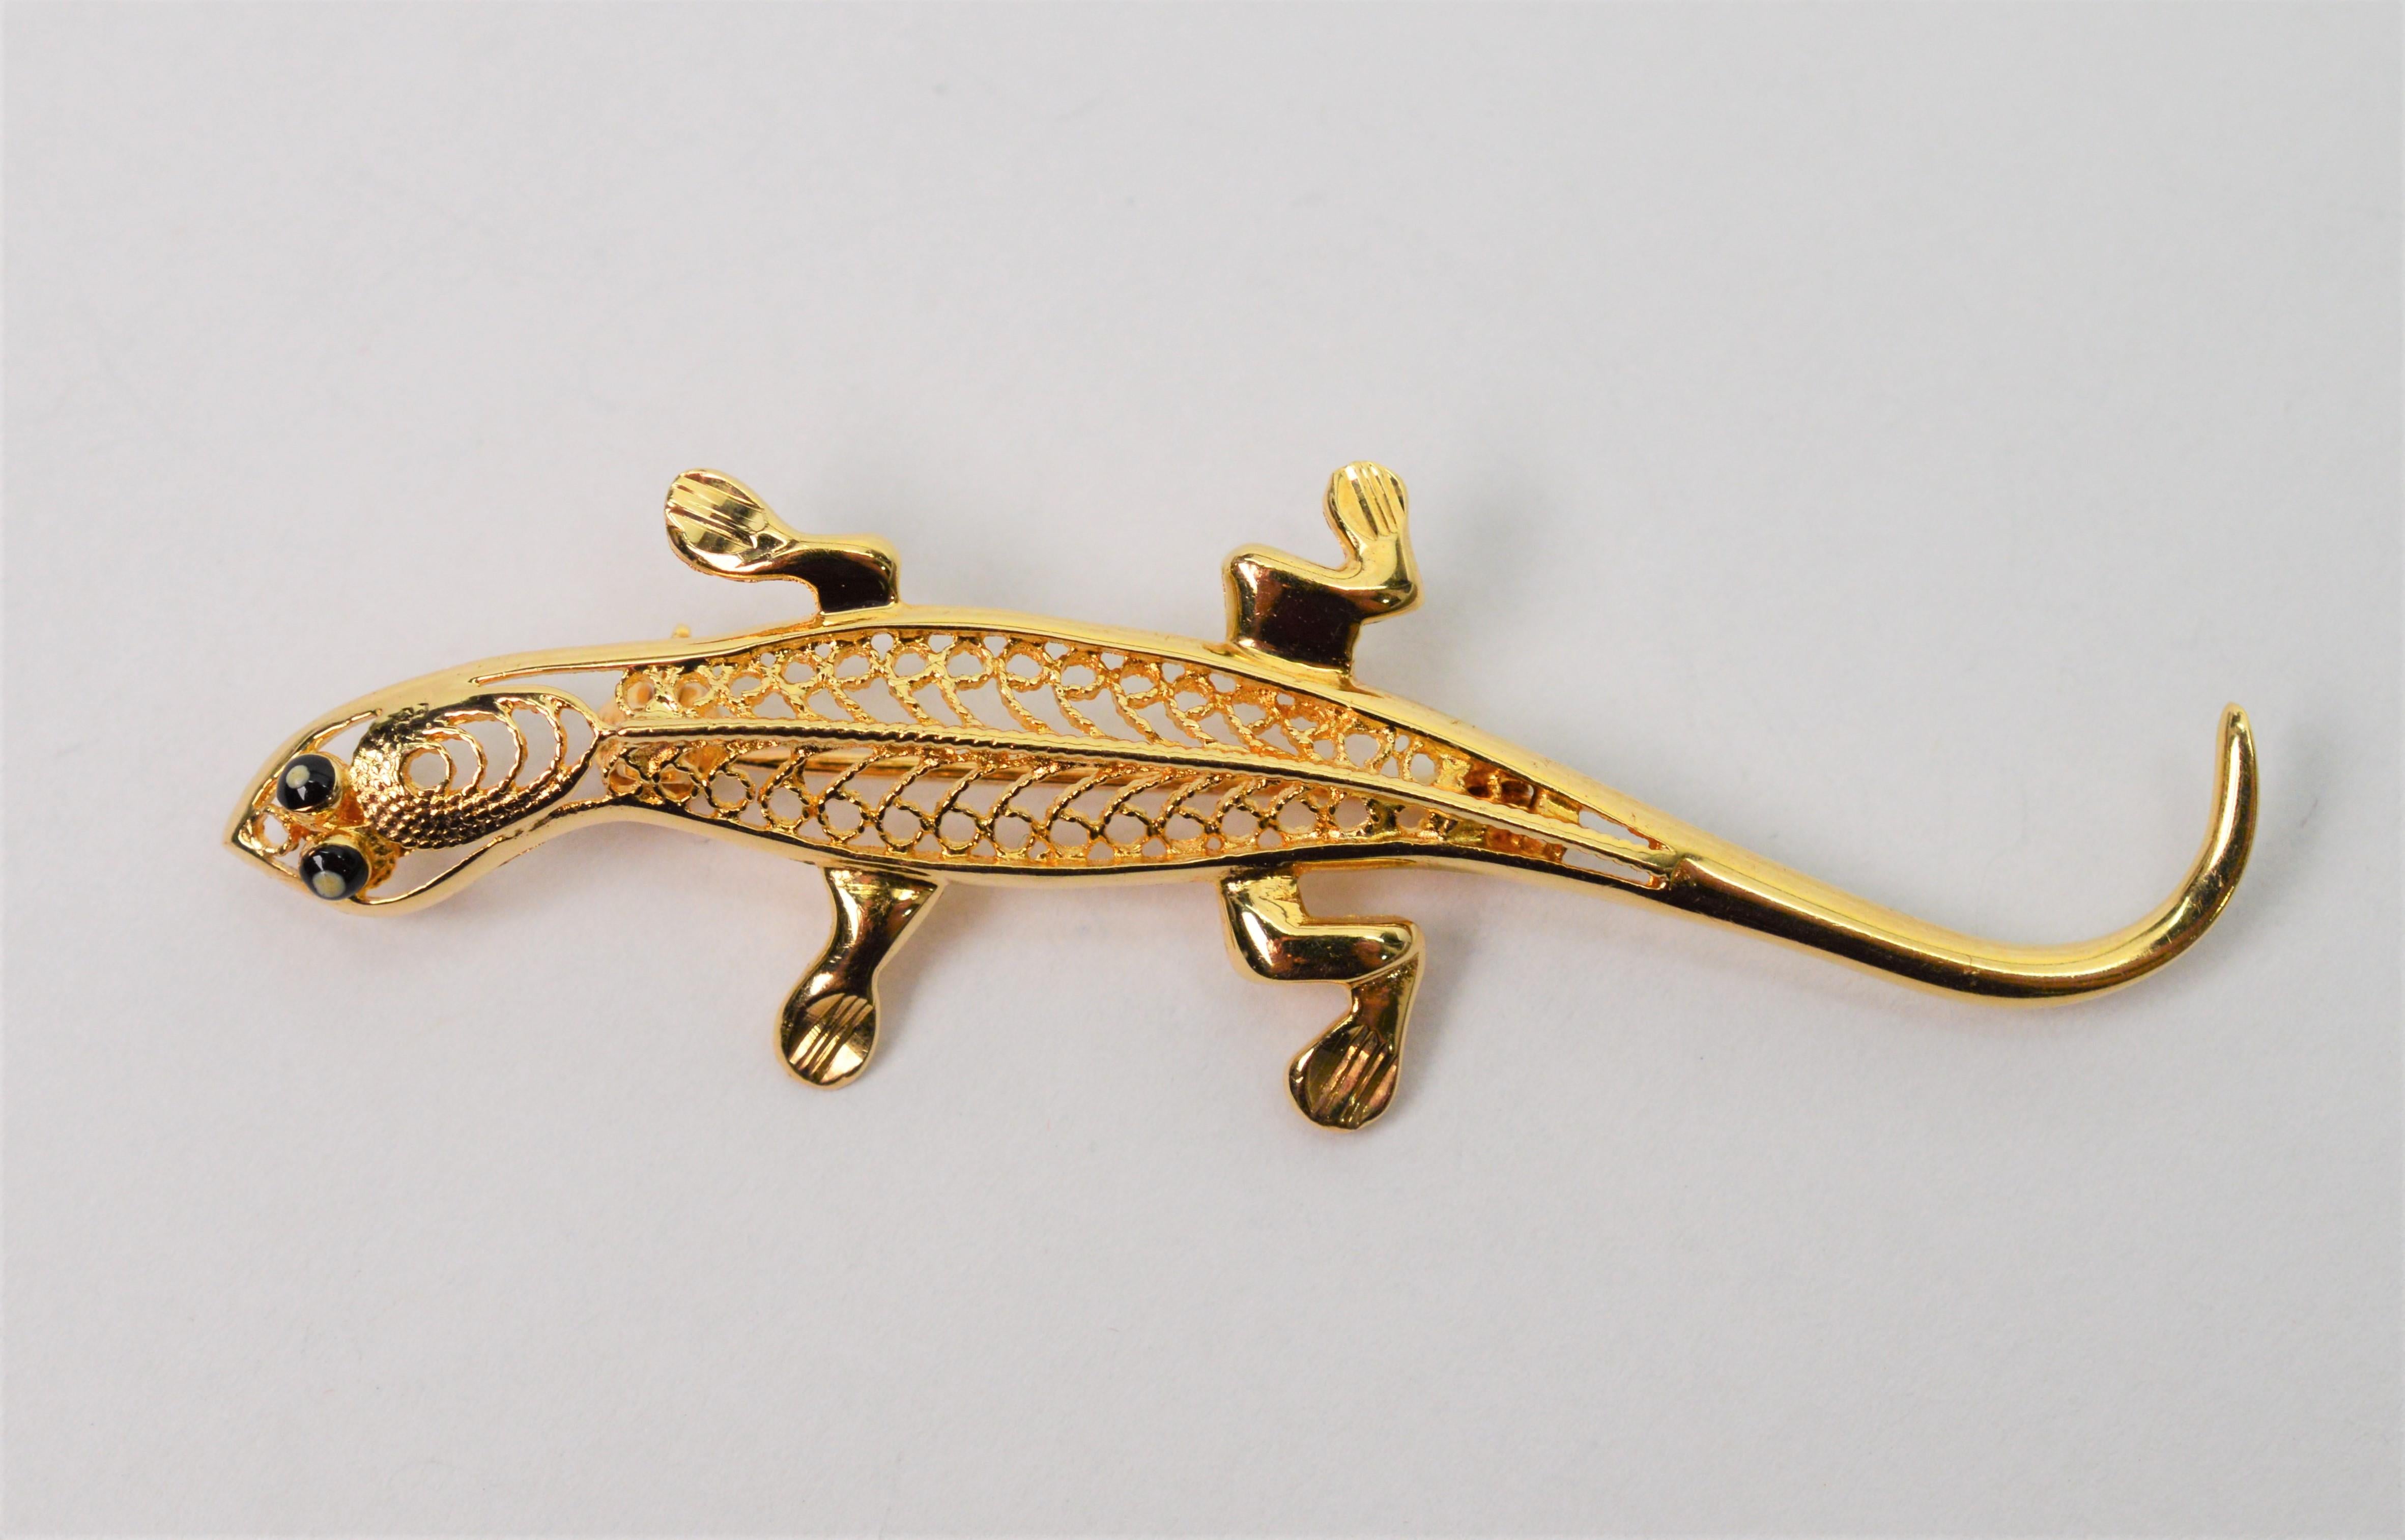 Accent your lapel with this adorable salamander, a symbol of rebirth. Crafted in fourteen karat yellow gold filigree with tiny onyx eyes, this little amphibian measures approximately 2-1/4 inches long by 3/4 inch wide. Stamped 14K by maker. Gift